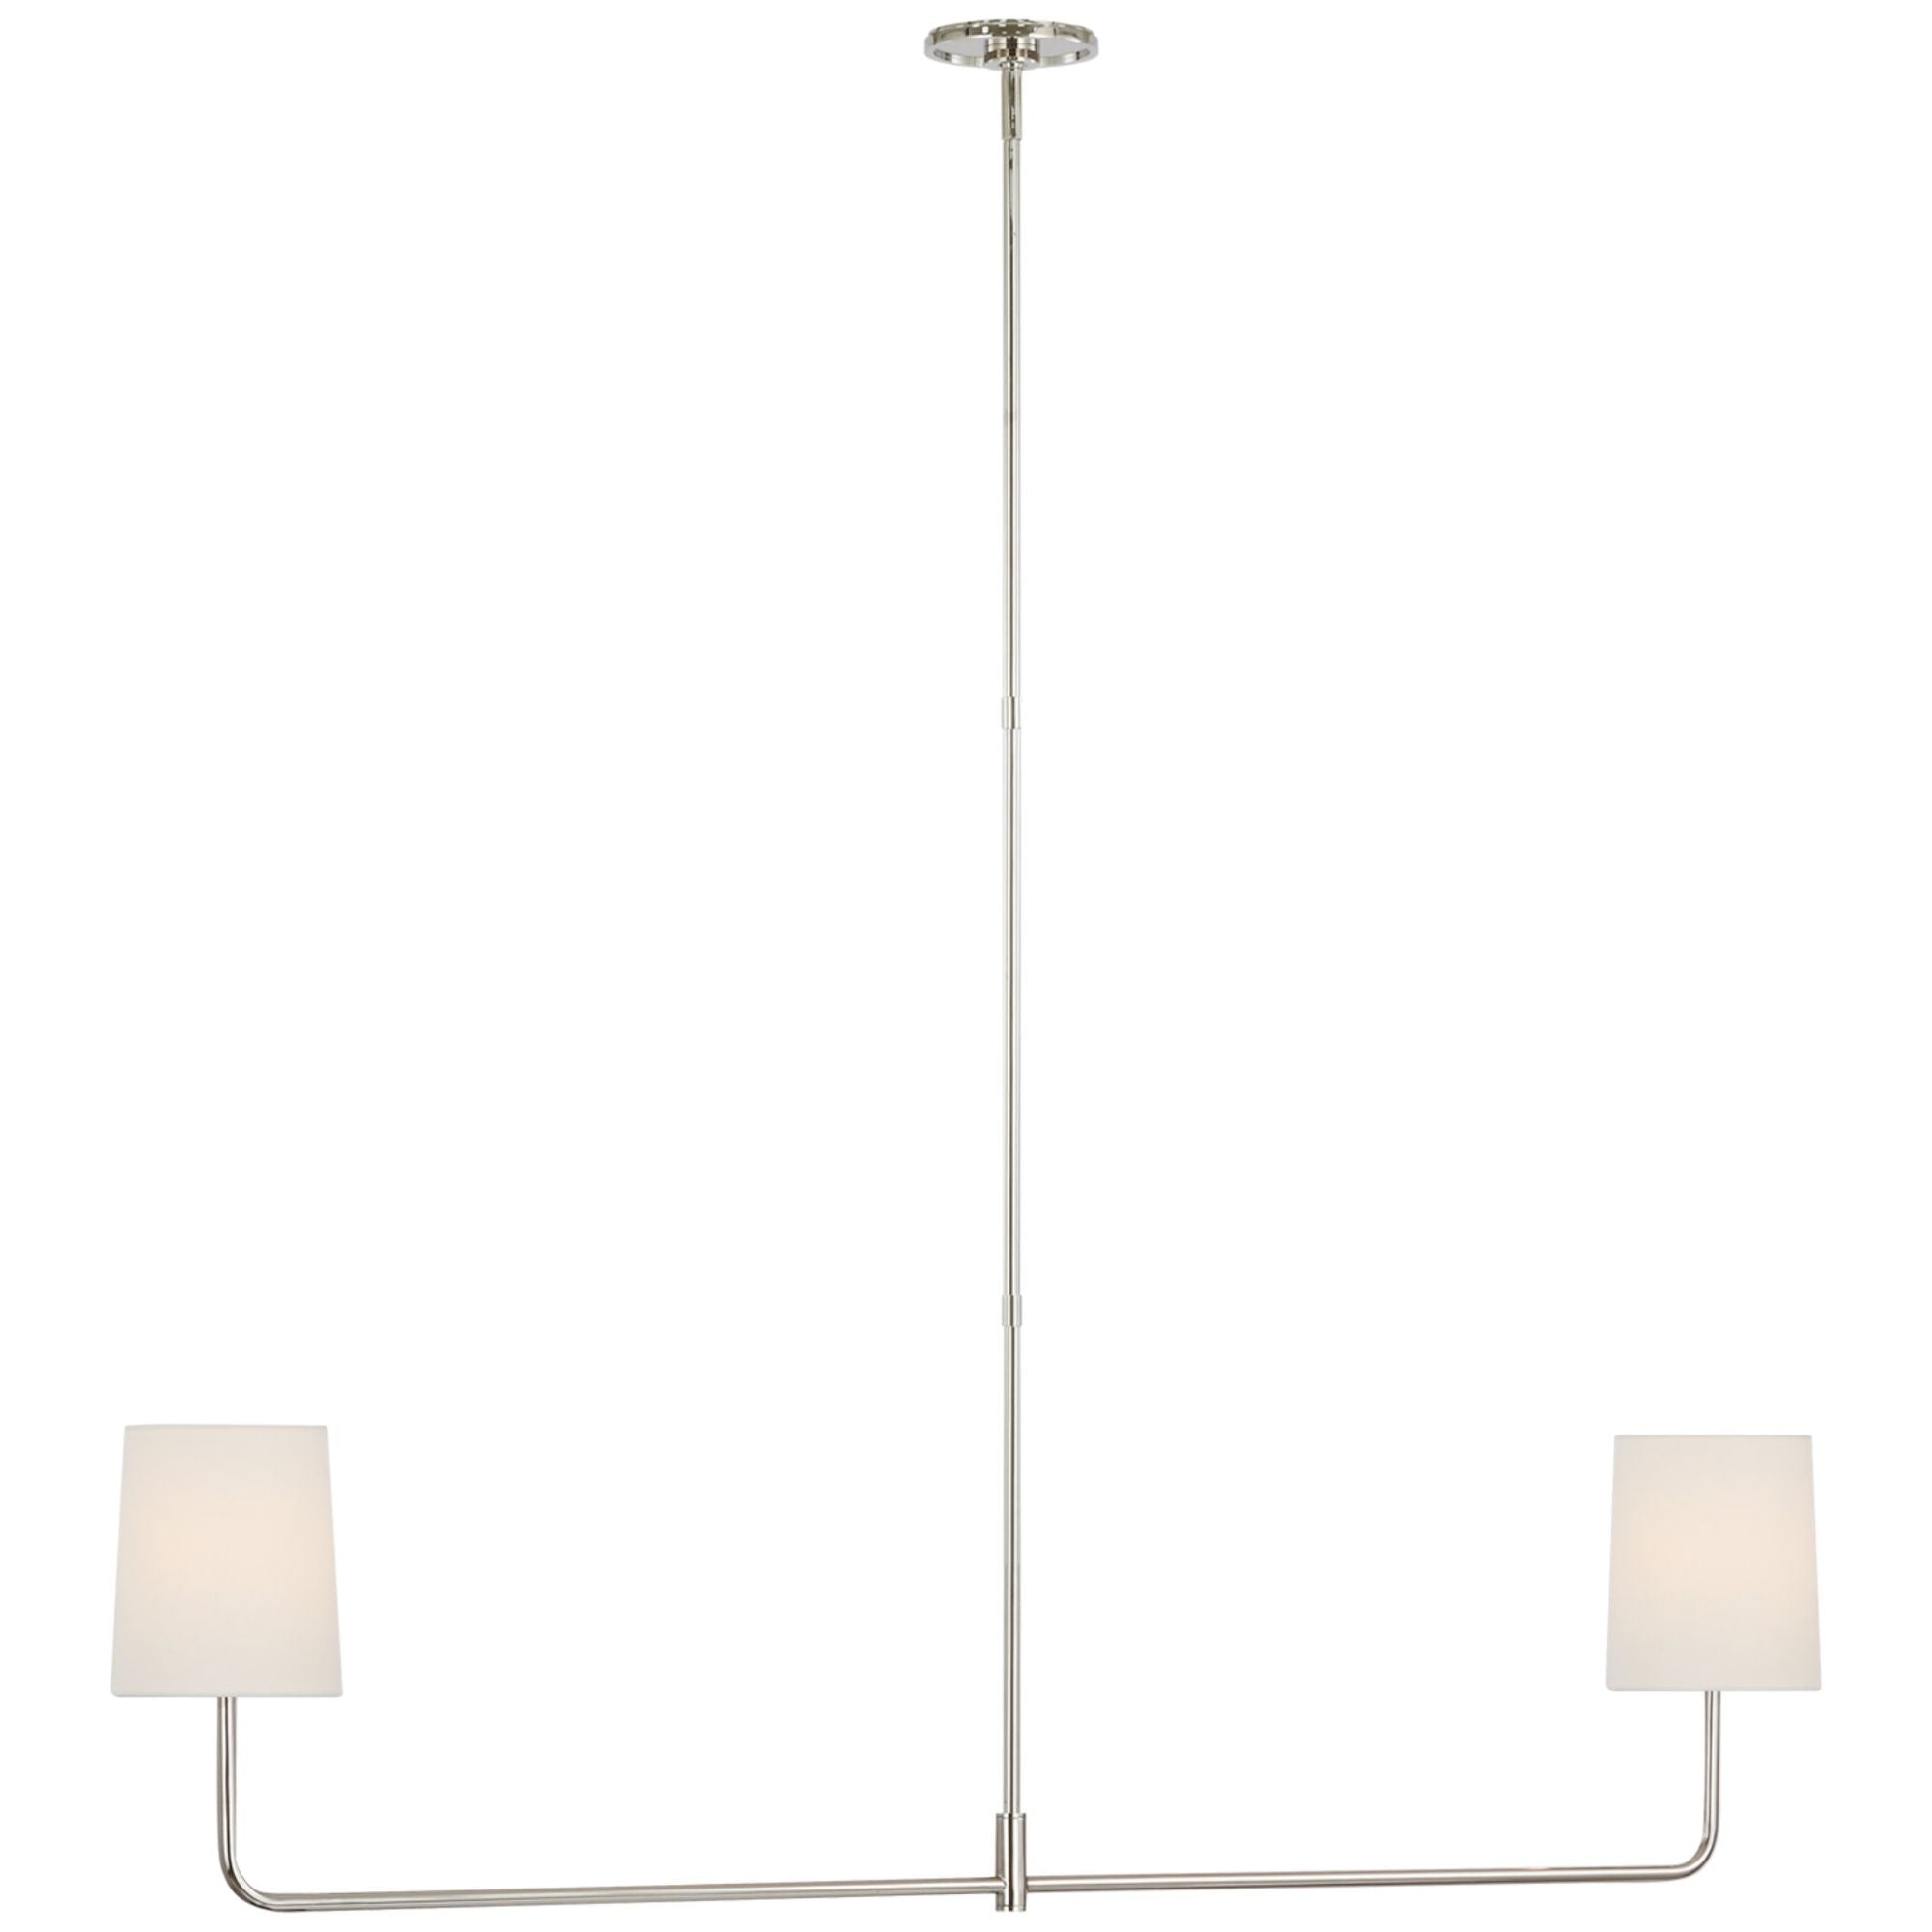 Barbara Barry Go Lightly 54" Two Light Linear Chandelier in Polished Nickel with Linen Shades